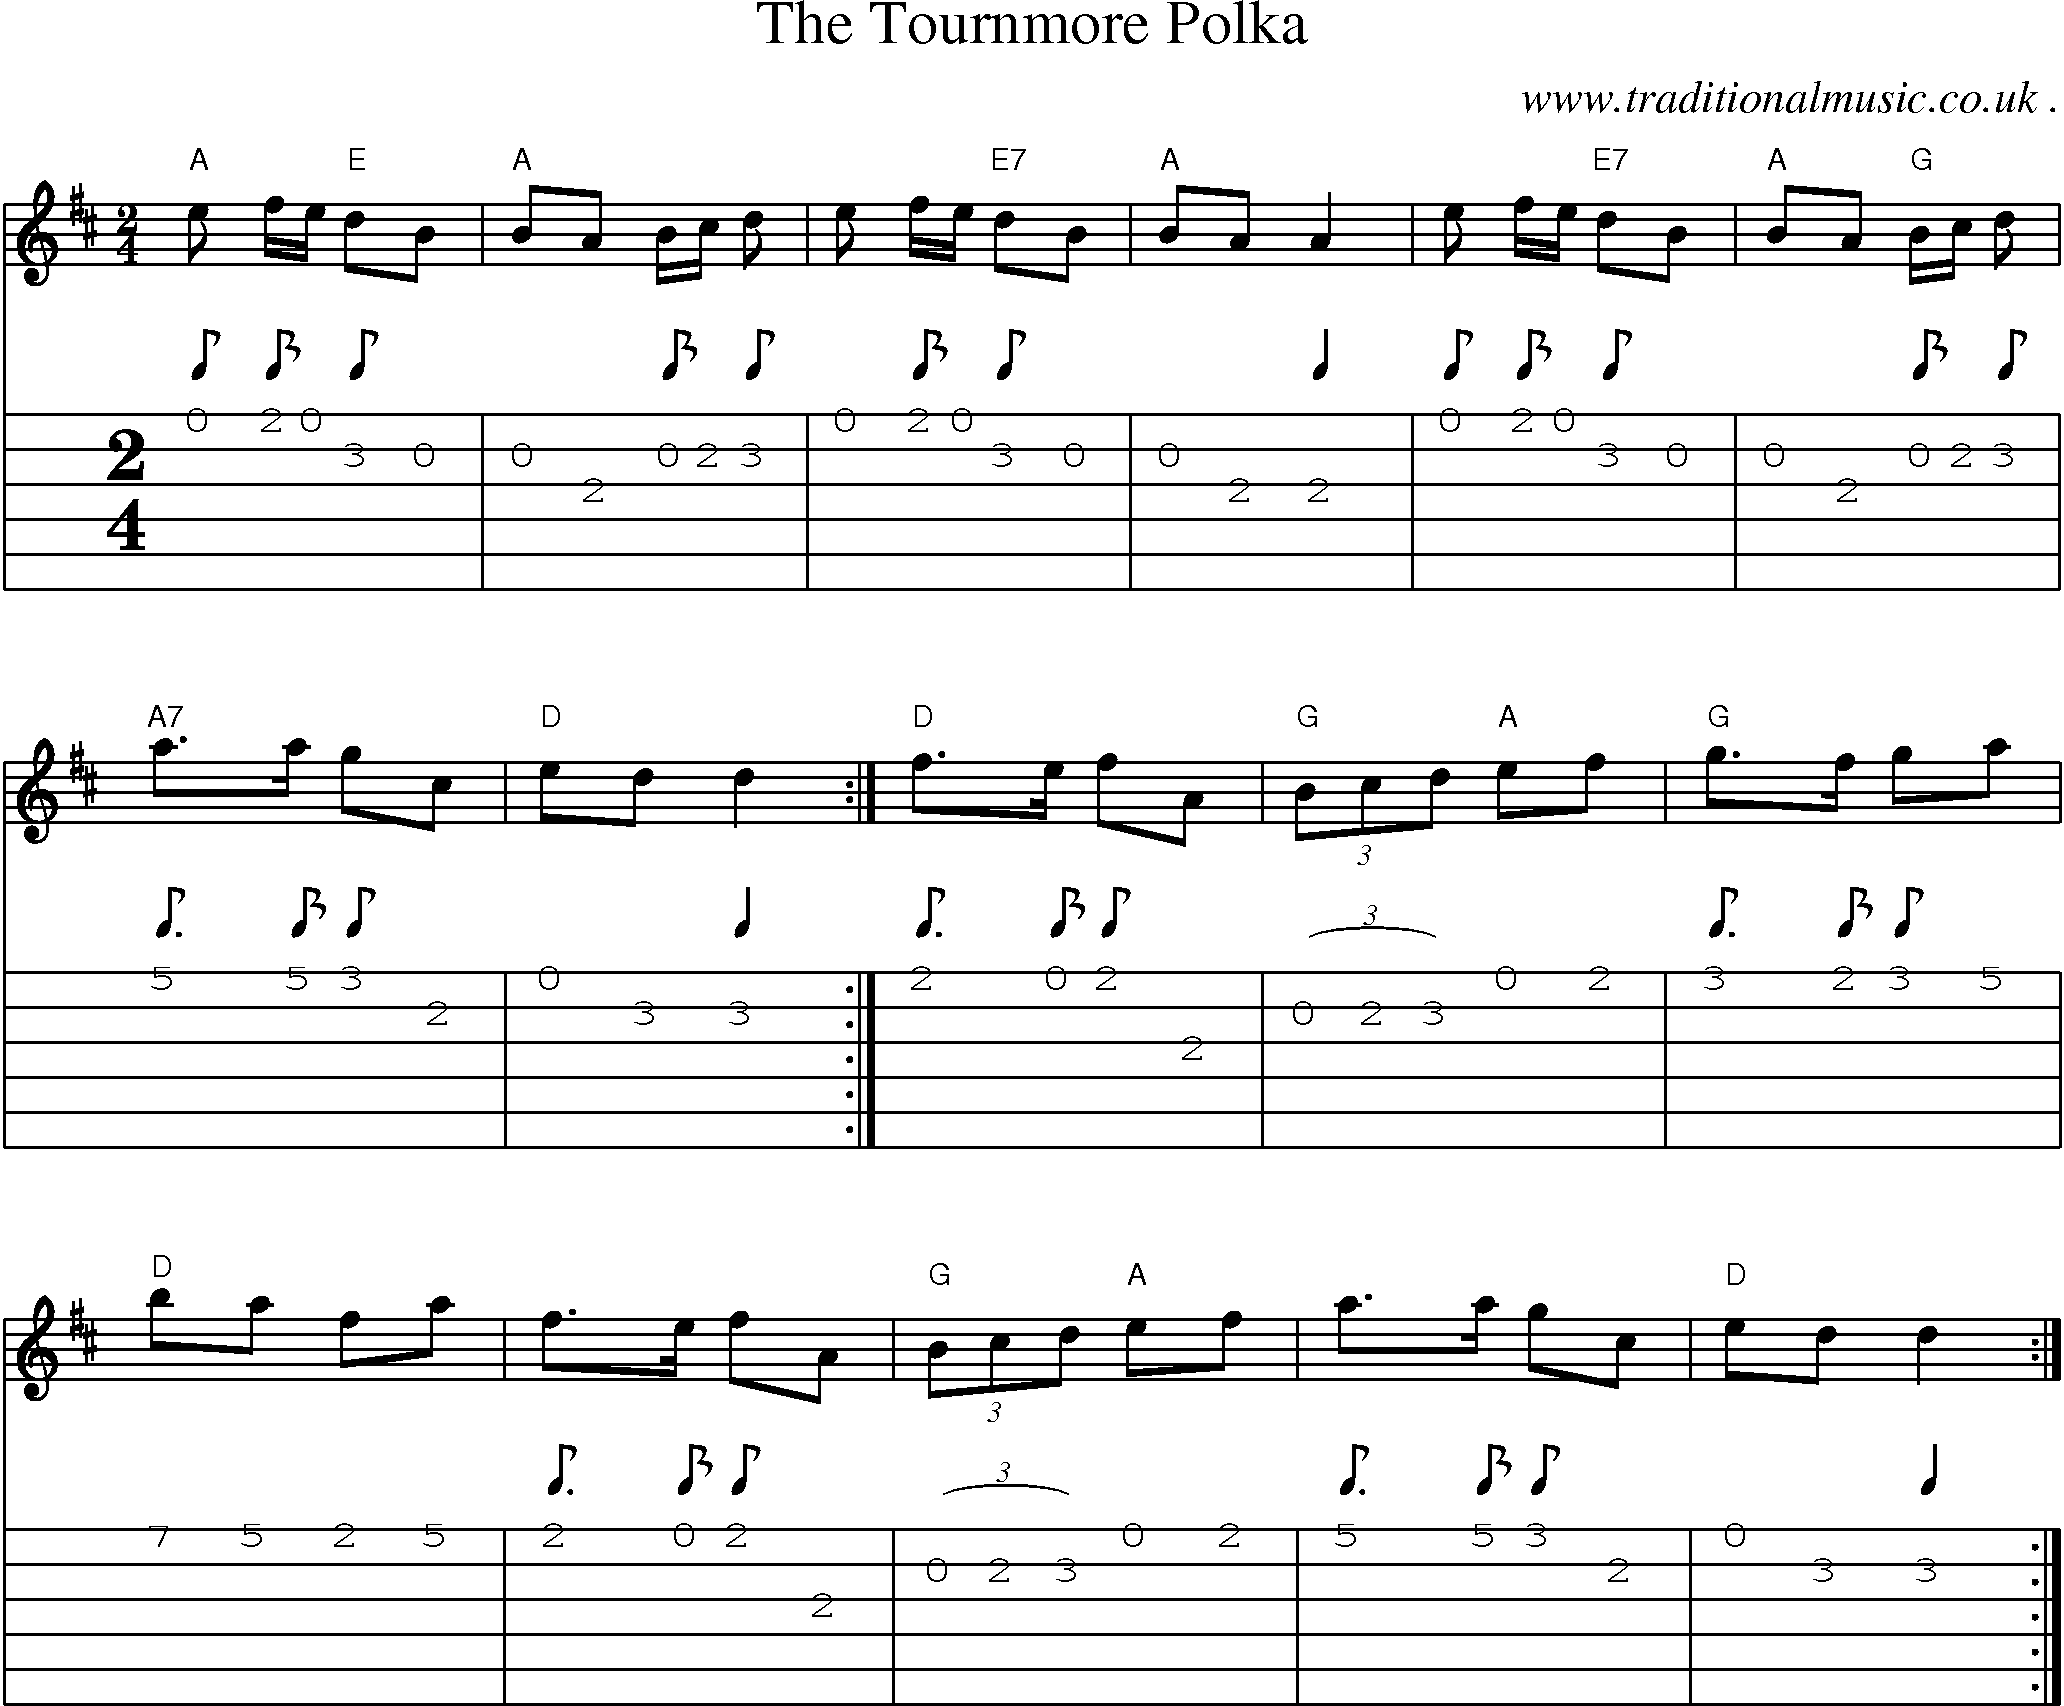 Music Score and Guitar Tabs for The Tournmore Polka